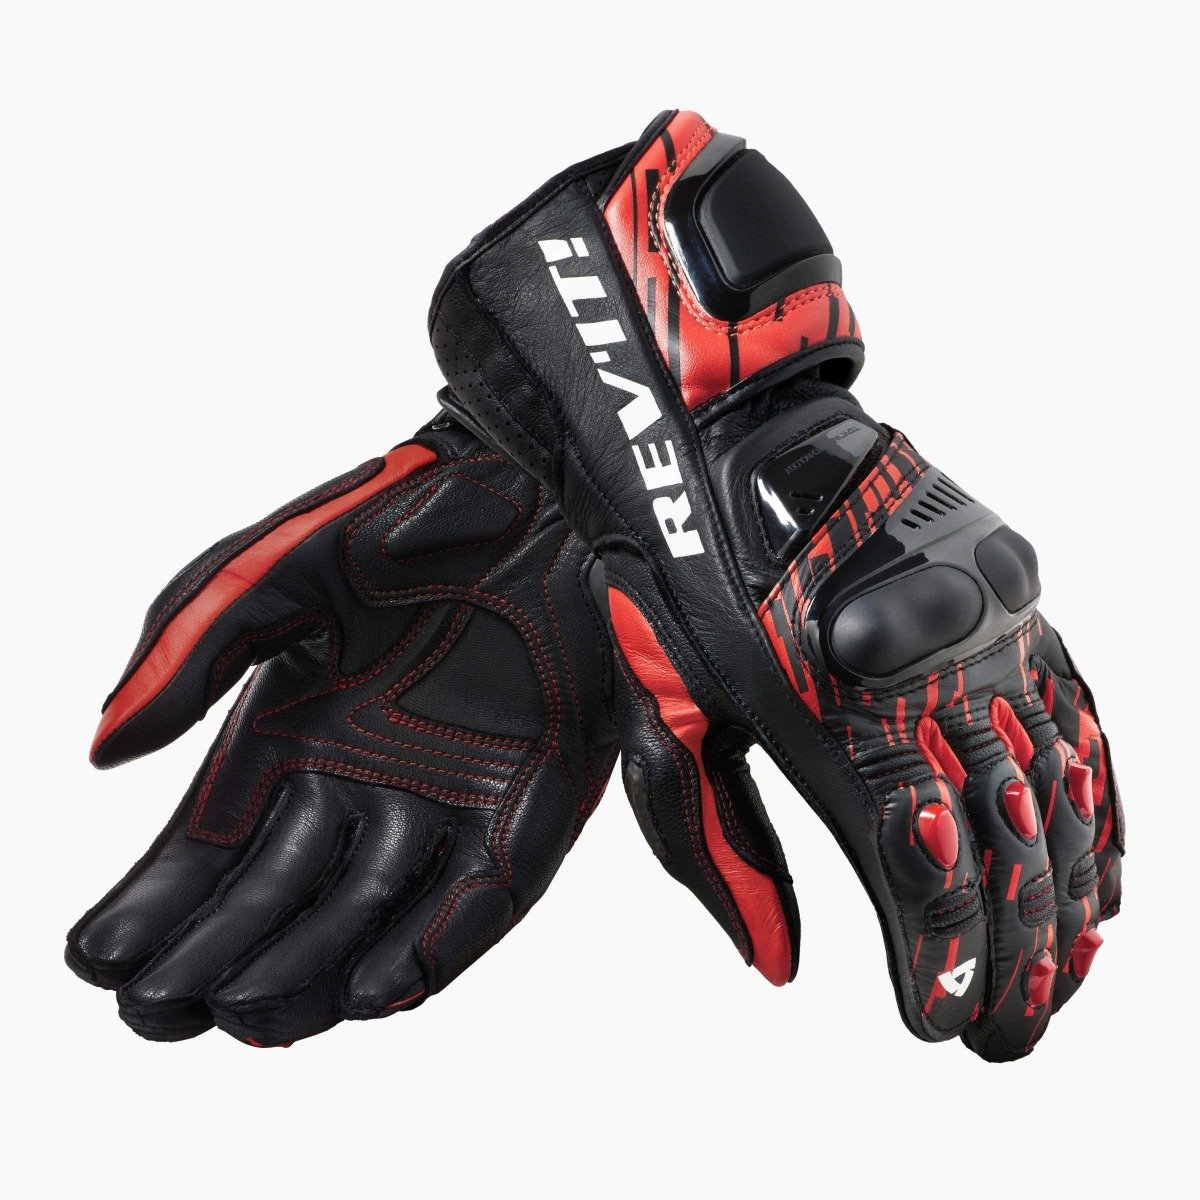 Image of REV'IT! Quantum 2 Neon Red Black Motorcycle Gloves Size M ID 8700001308786